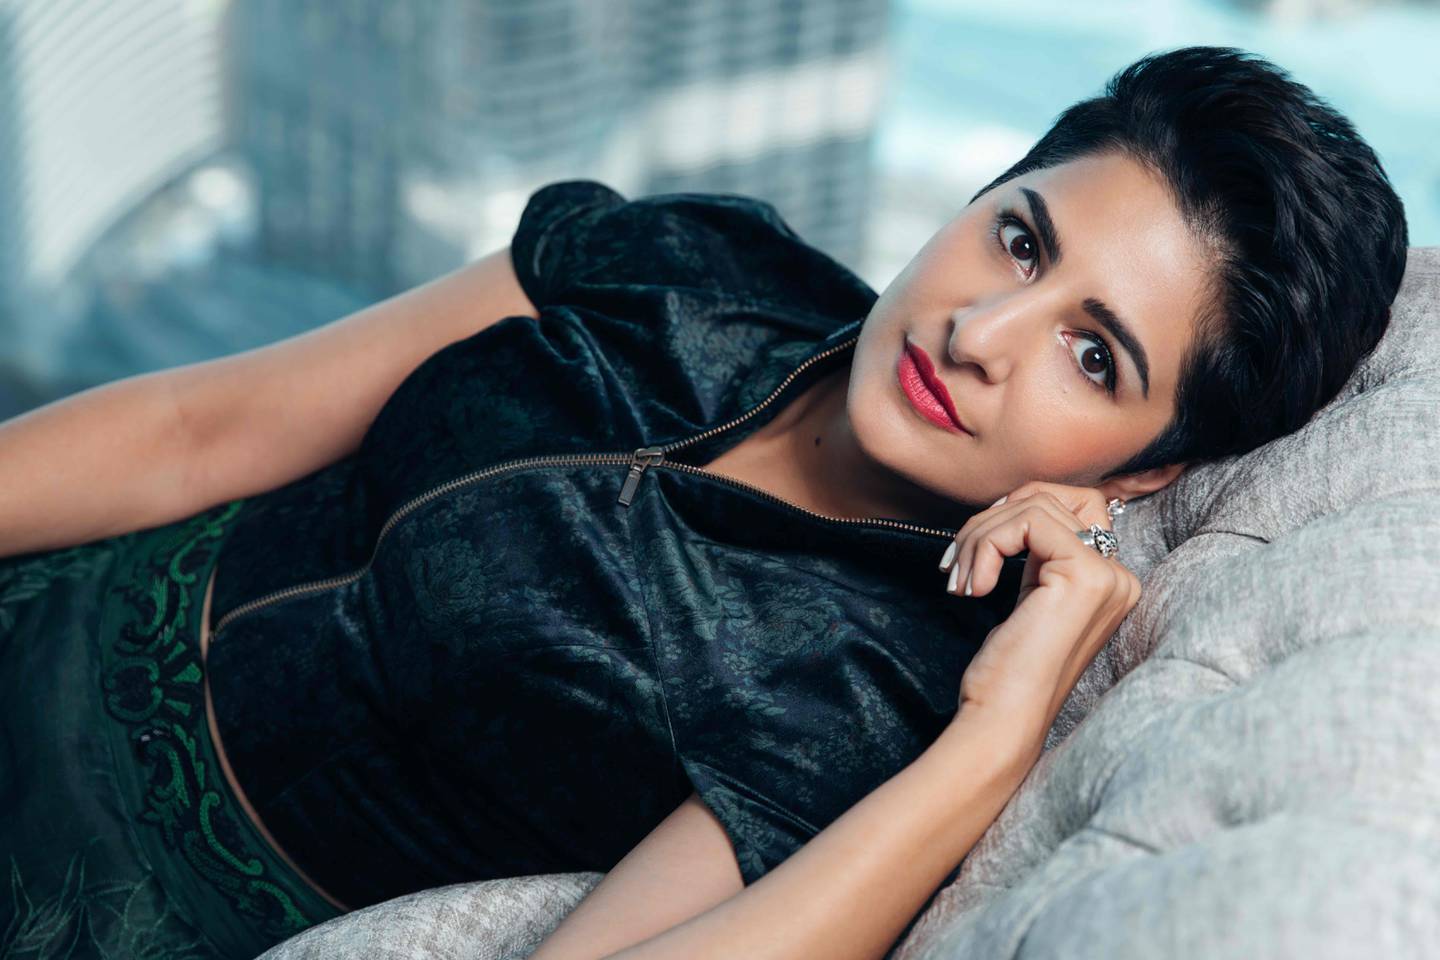 UAE resident and cancer survivor Anisha Oberoi launched Secret Skin to make clean beauty products more accessible to residents. Photo: Secret Skin